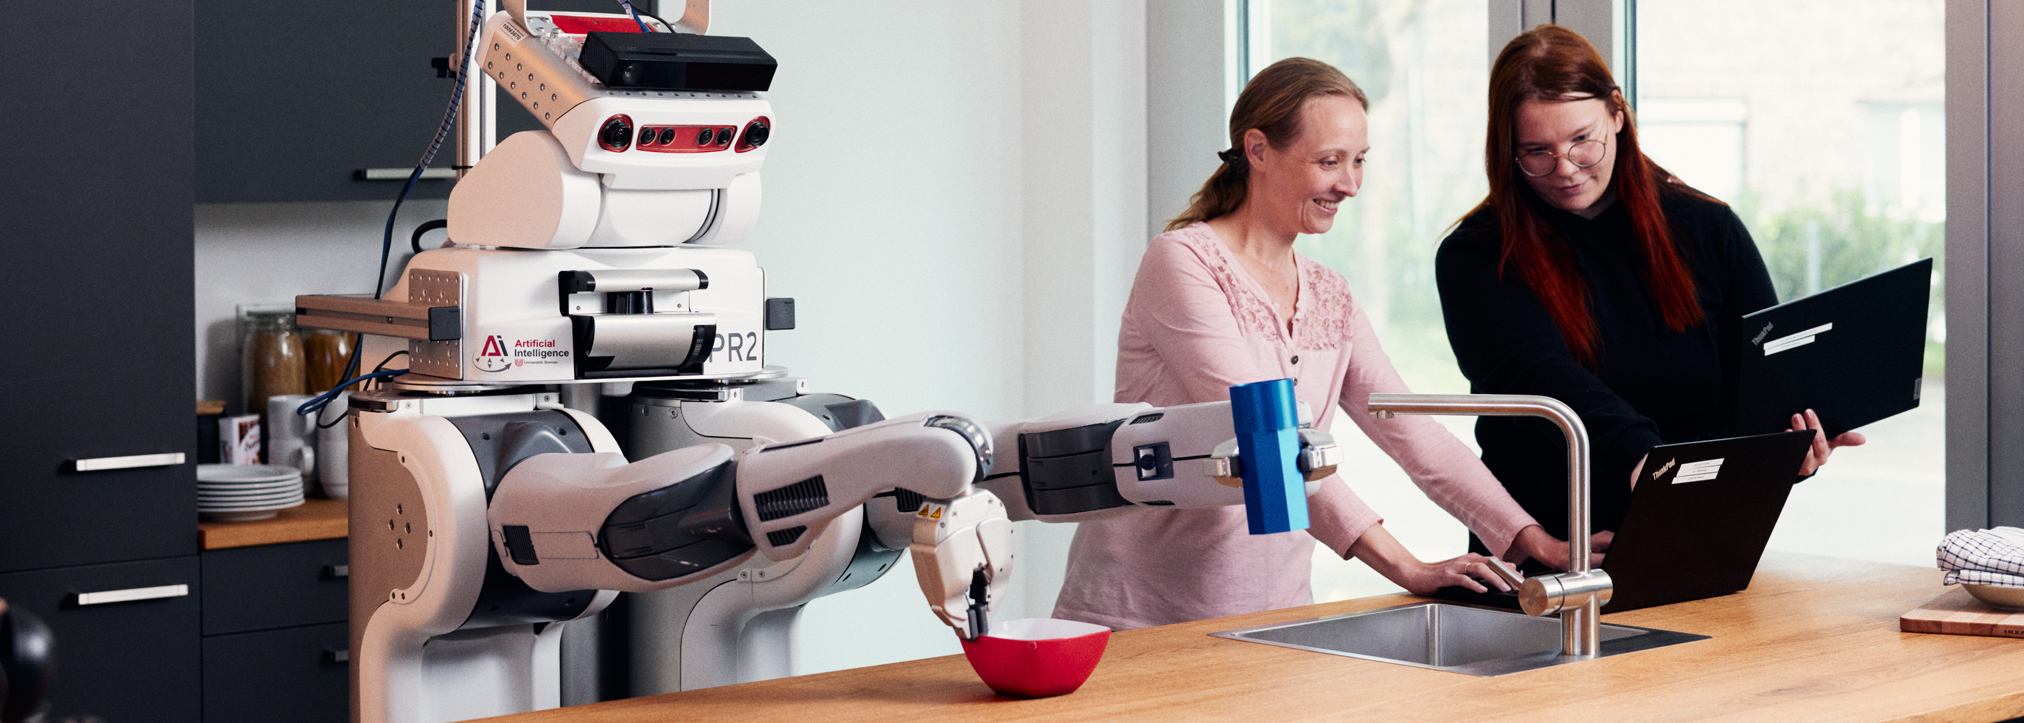 A robot stands behind a kitchen counter together with two women. The women operate a laptop, the robot stirs in a bowl.